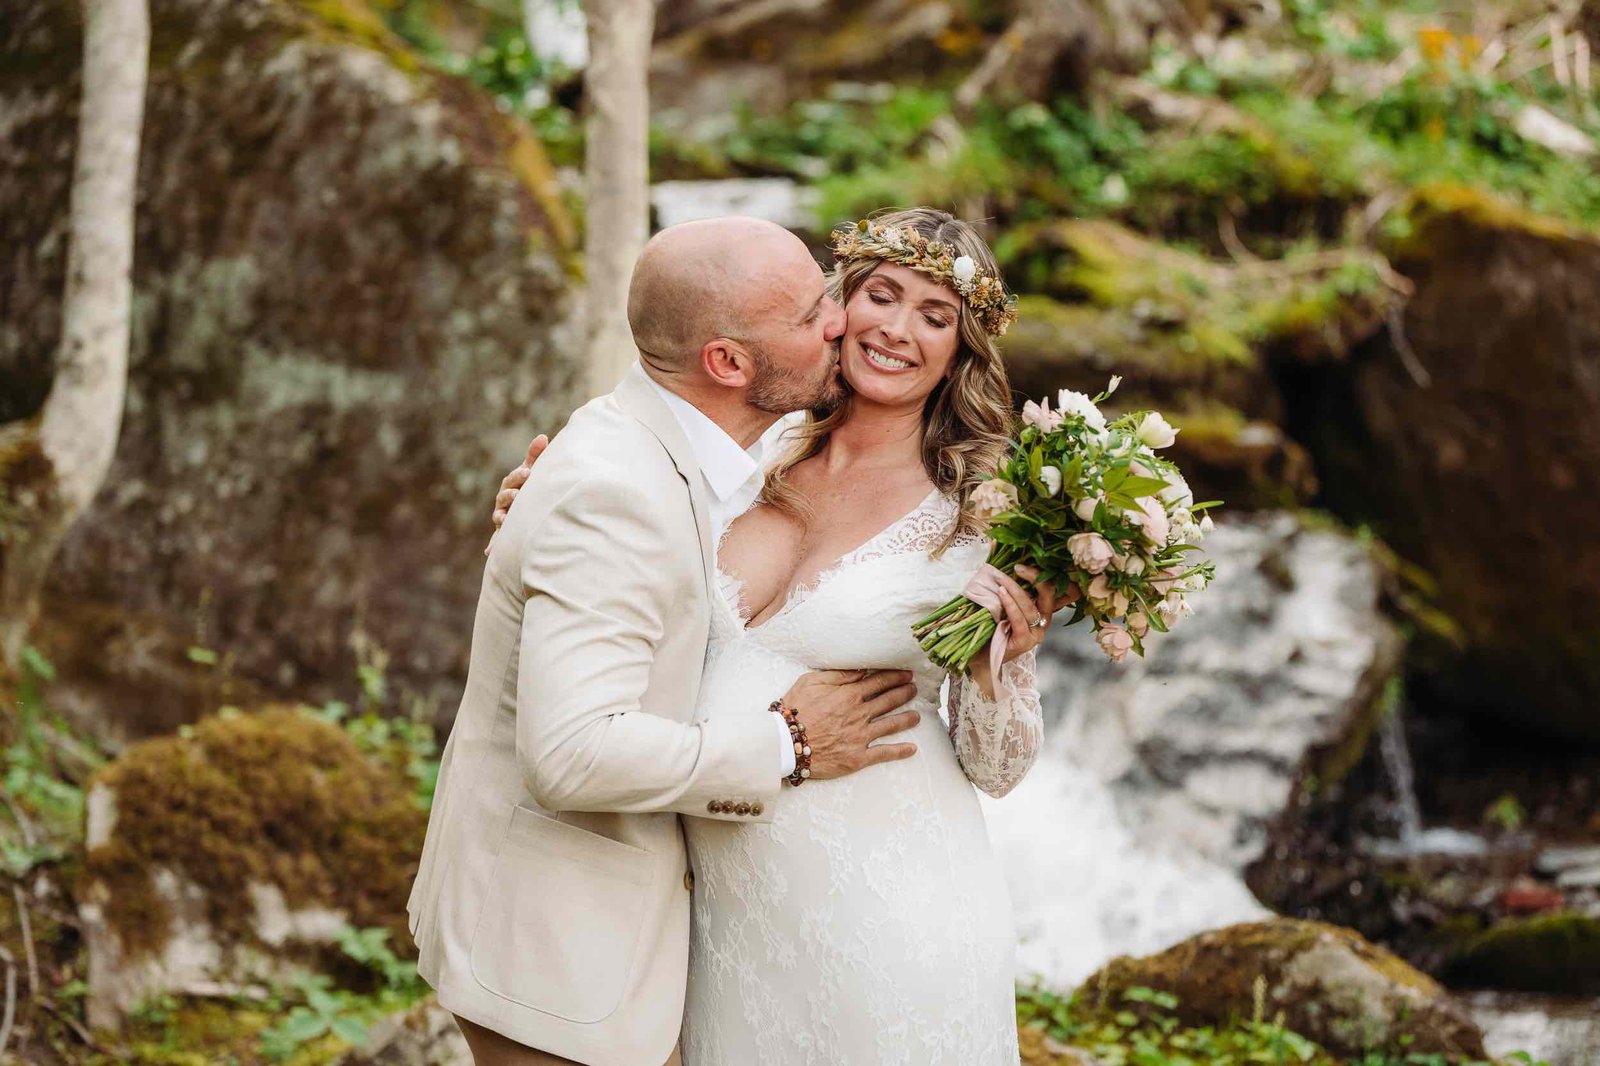 Elopement Spotlight: Create Unforgettable Outdoor Elopement Packages with Meghan Rolfe and Elope Outdoors